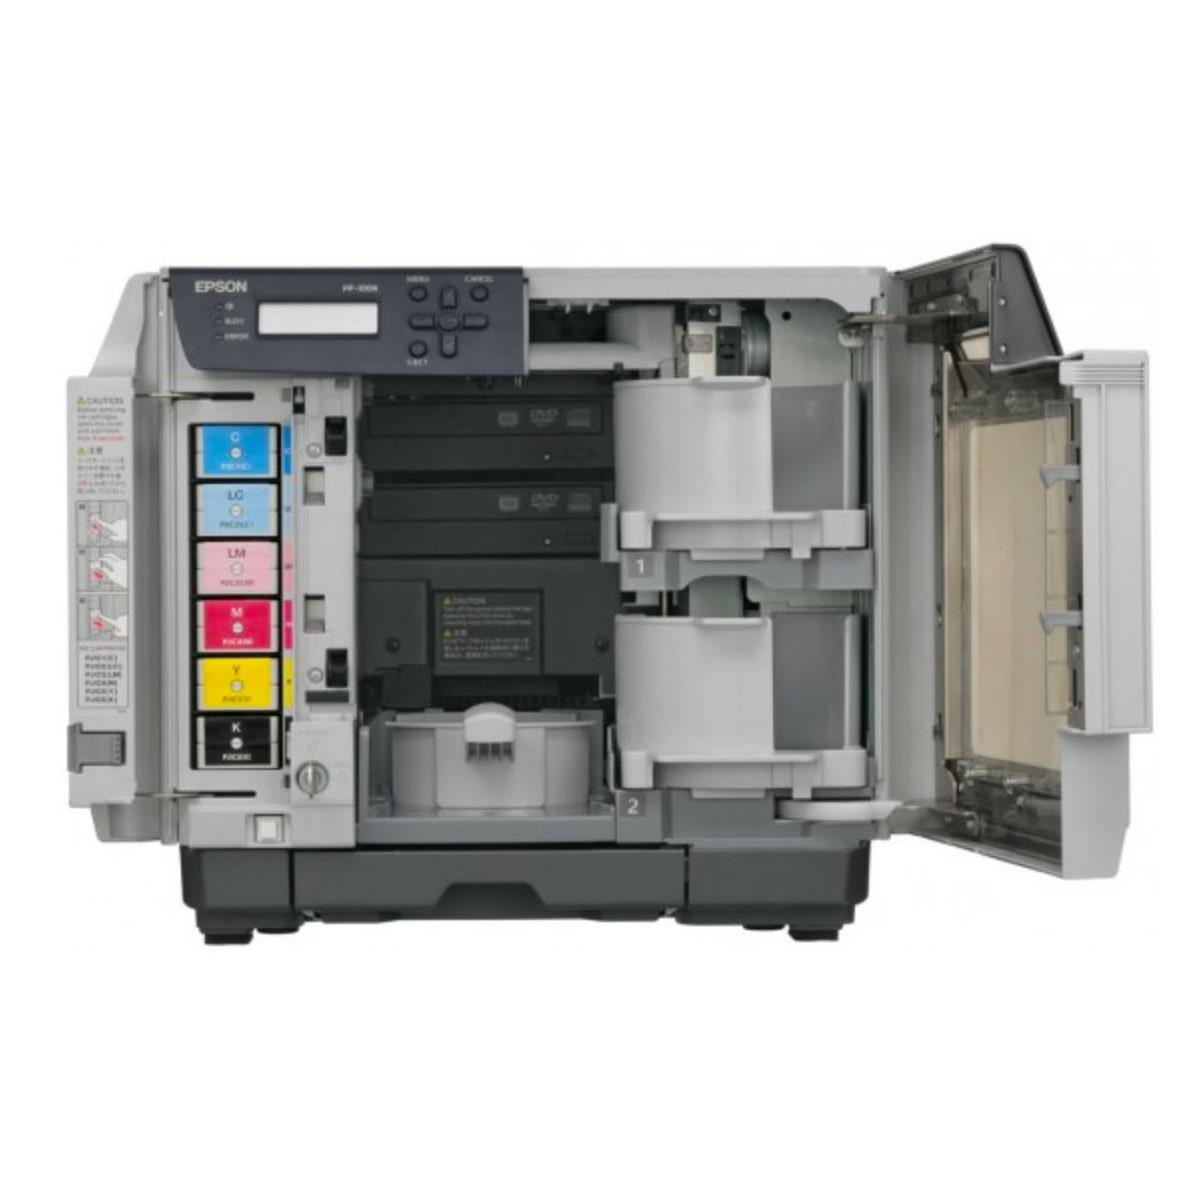 Epson Discproducer PP-100N Network Edition